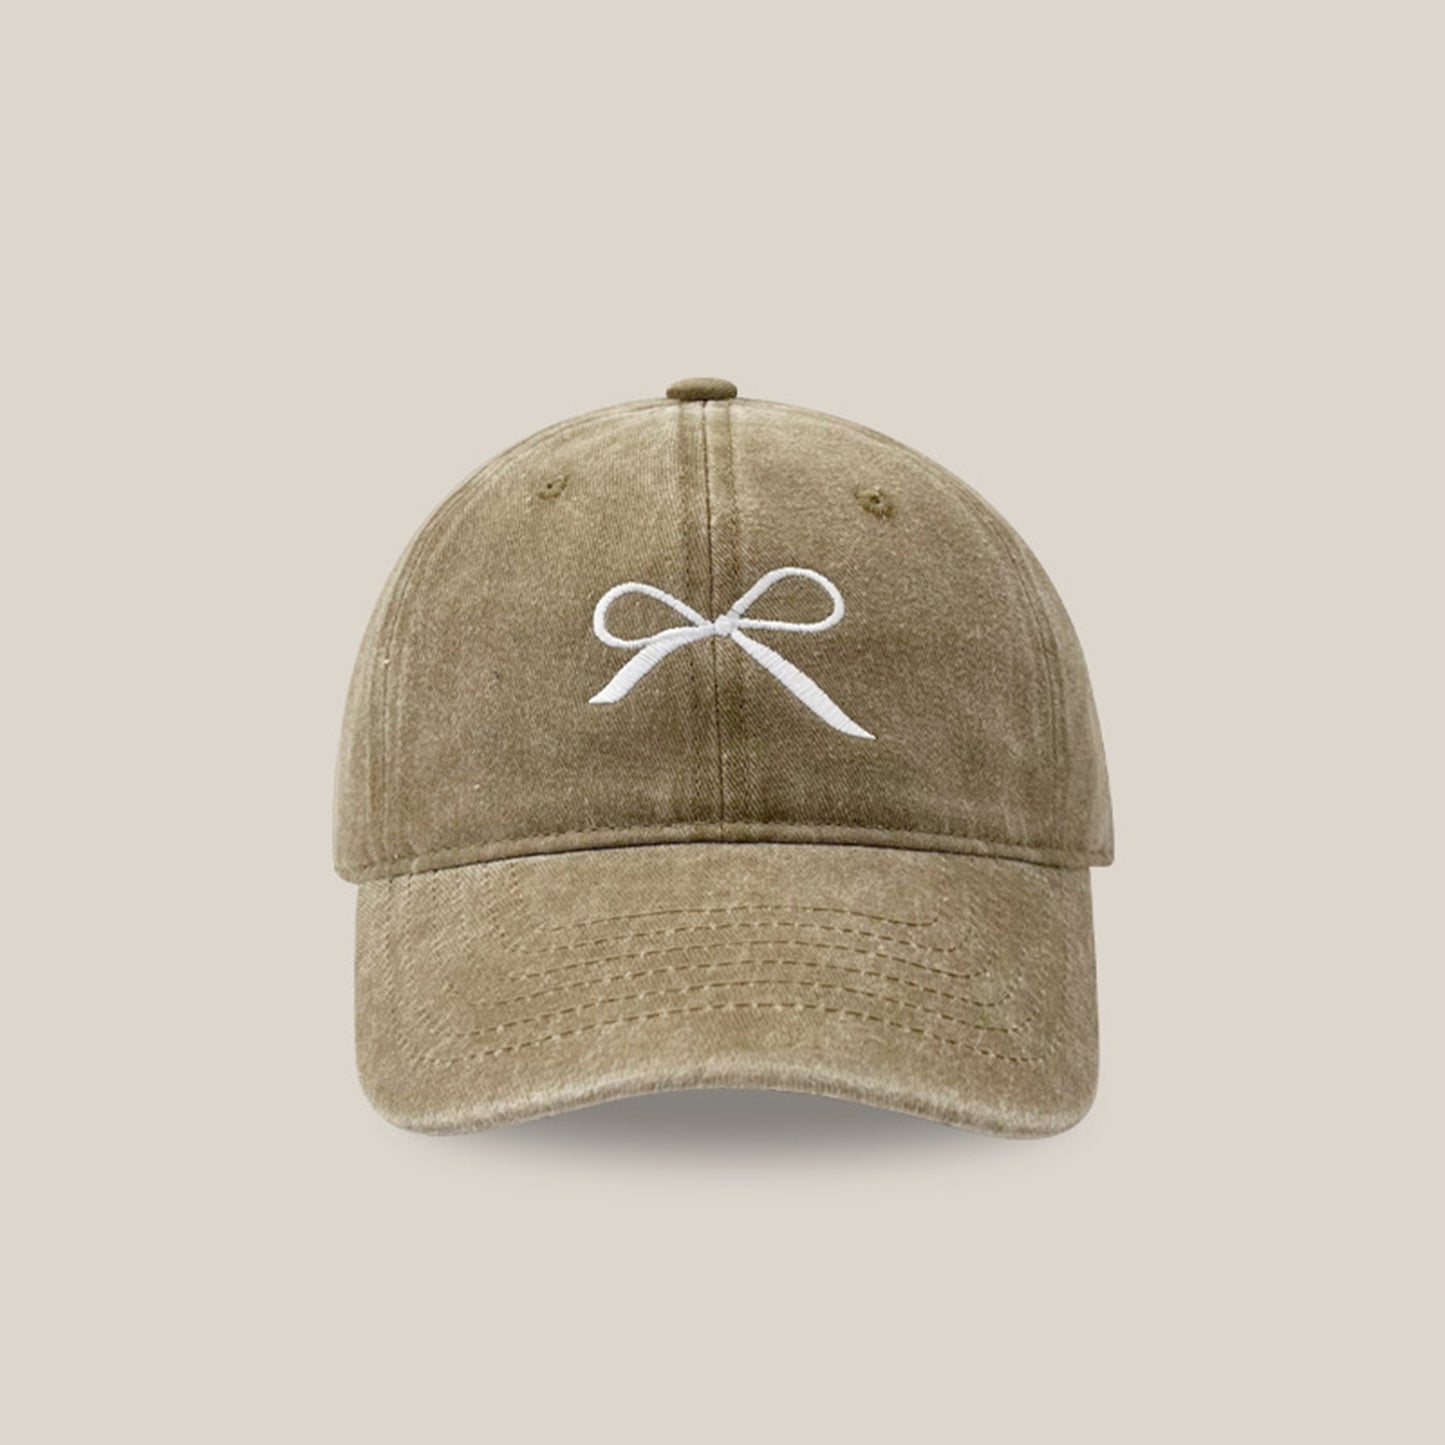 Bow Embroidered Adjustable Cap Khaki One Size